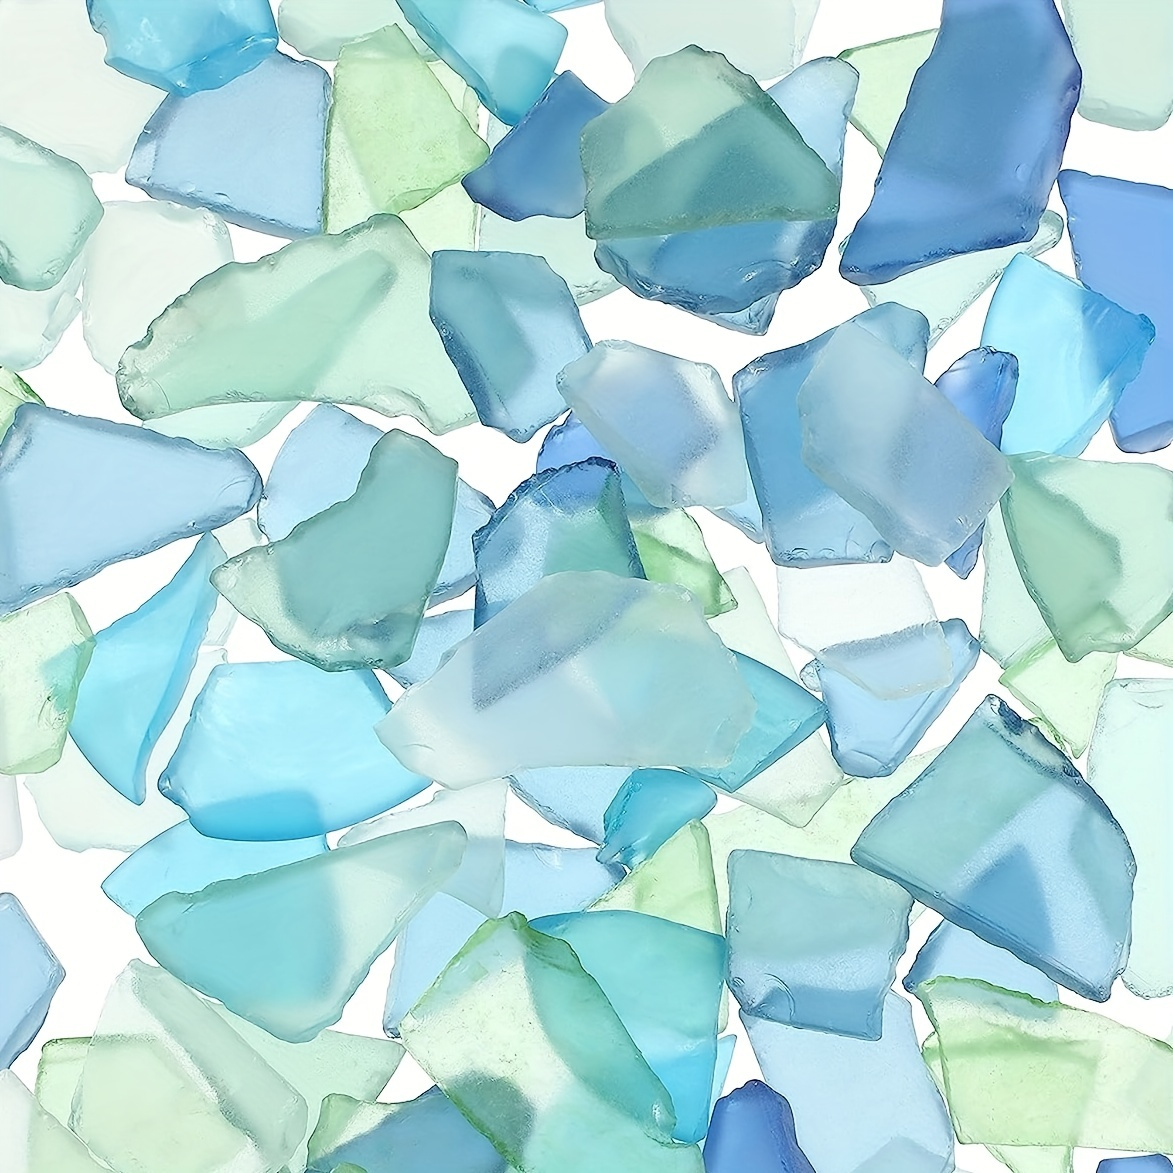 Sea Glass Pieces for Crafts, Weddings & Home Decor - Frosted Flat Glass in  Blue, White & Green (11 Oz)